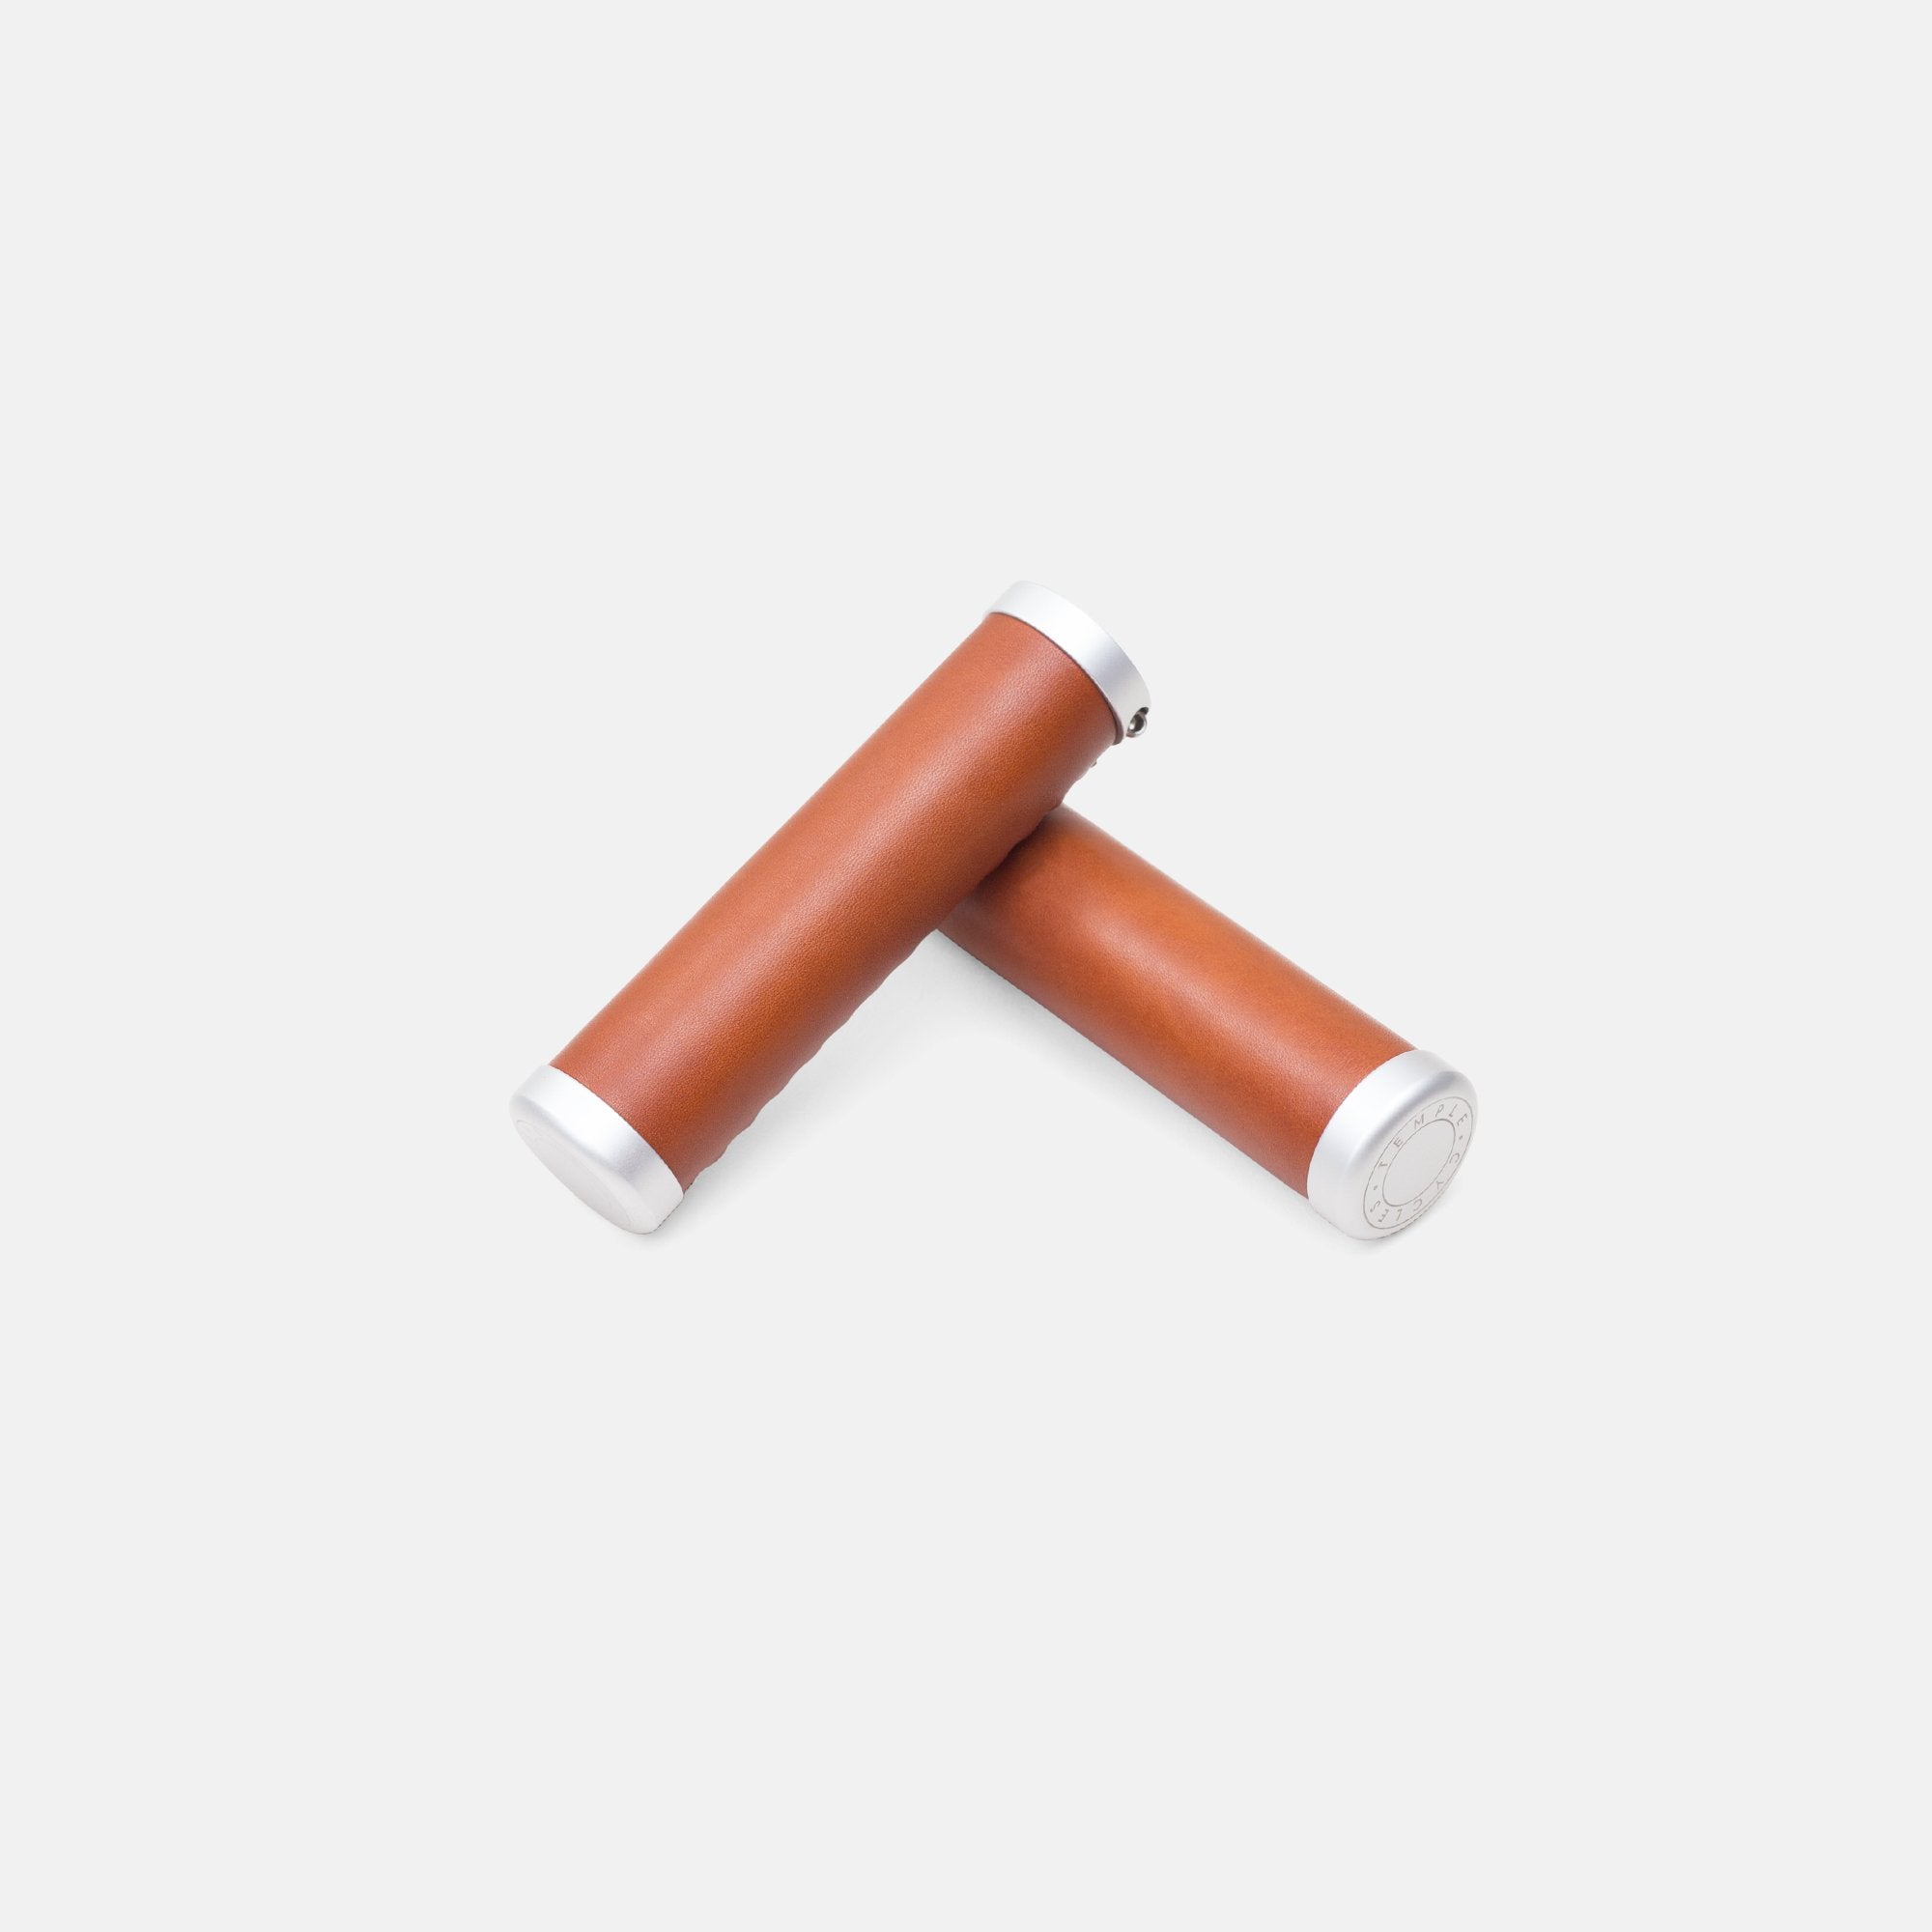 Temple Premium Leather Grips - Light Brown